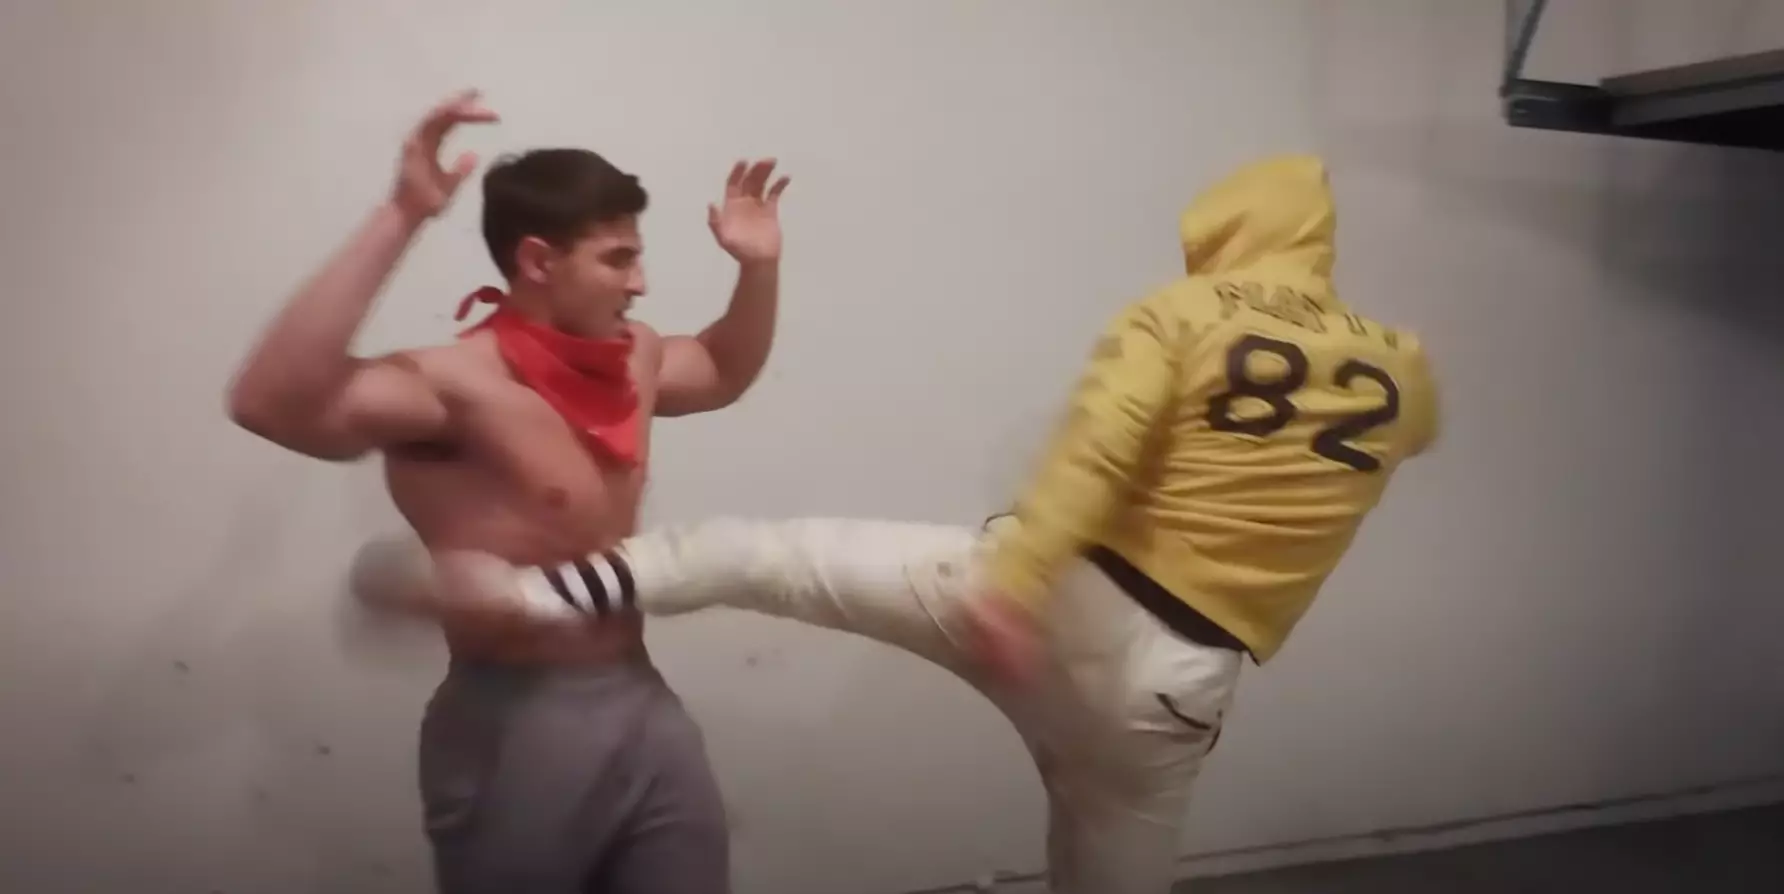 YouTuber Takes Vicious Body Kicks From Former UFC Champion In Viral Video, Suffers 'Crippling Pain'